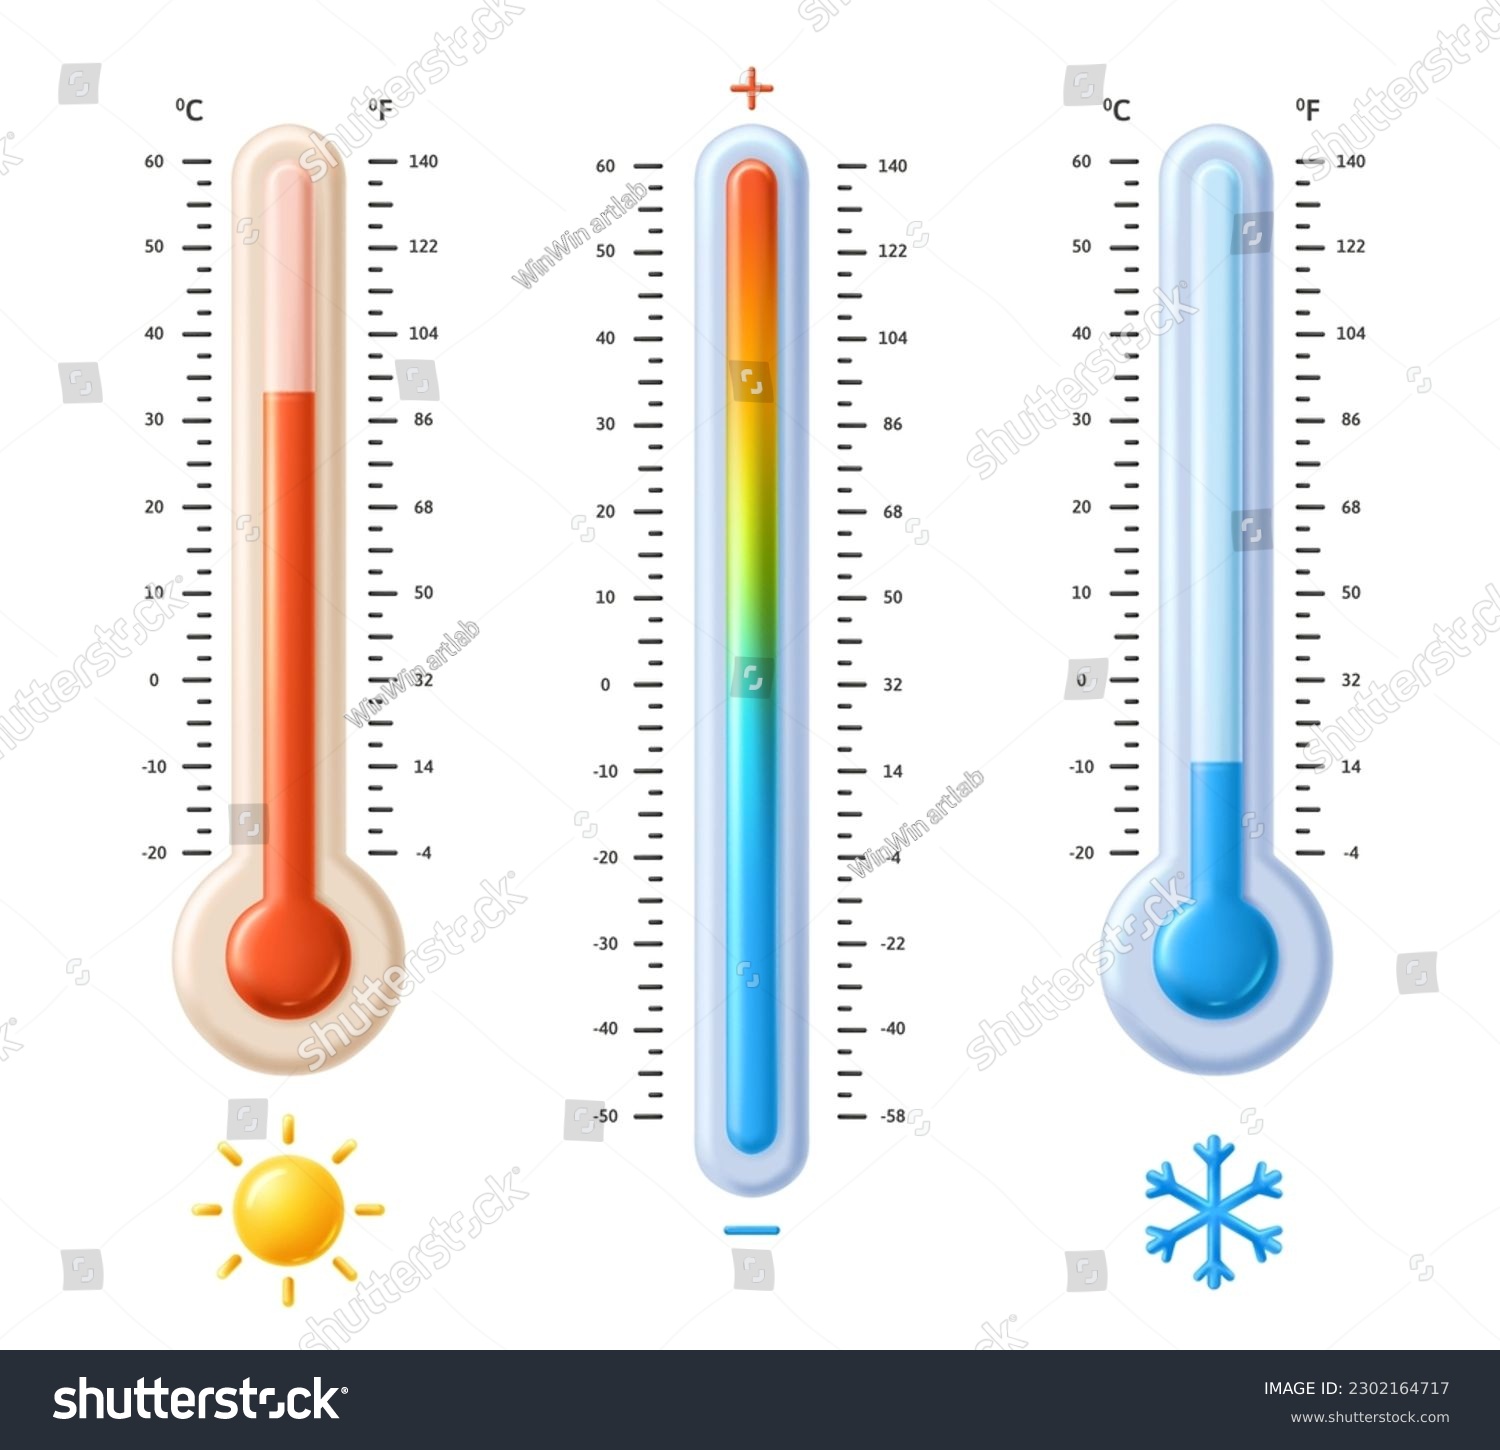 Fahrenheit and celsius thermometers. Temperature spectrum scale with hot sun and cold snowflake icons, weather meteorology measurement 3D vector illustration set of fahrenheit and celsius thermometer #2302164717